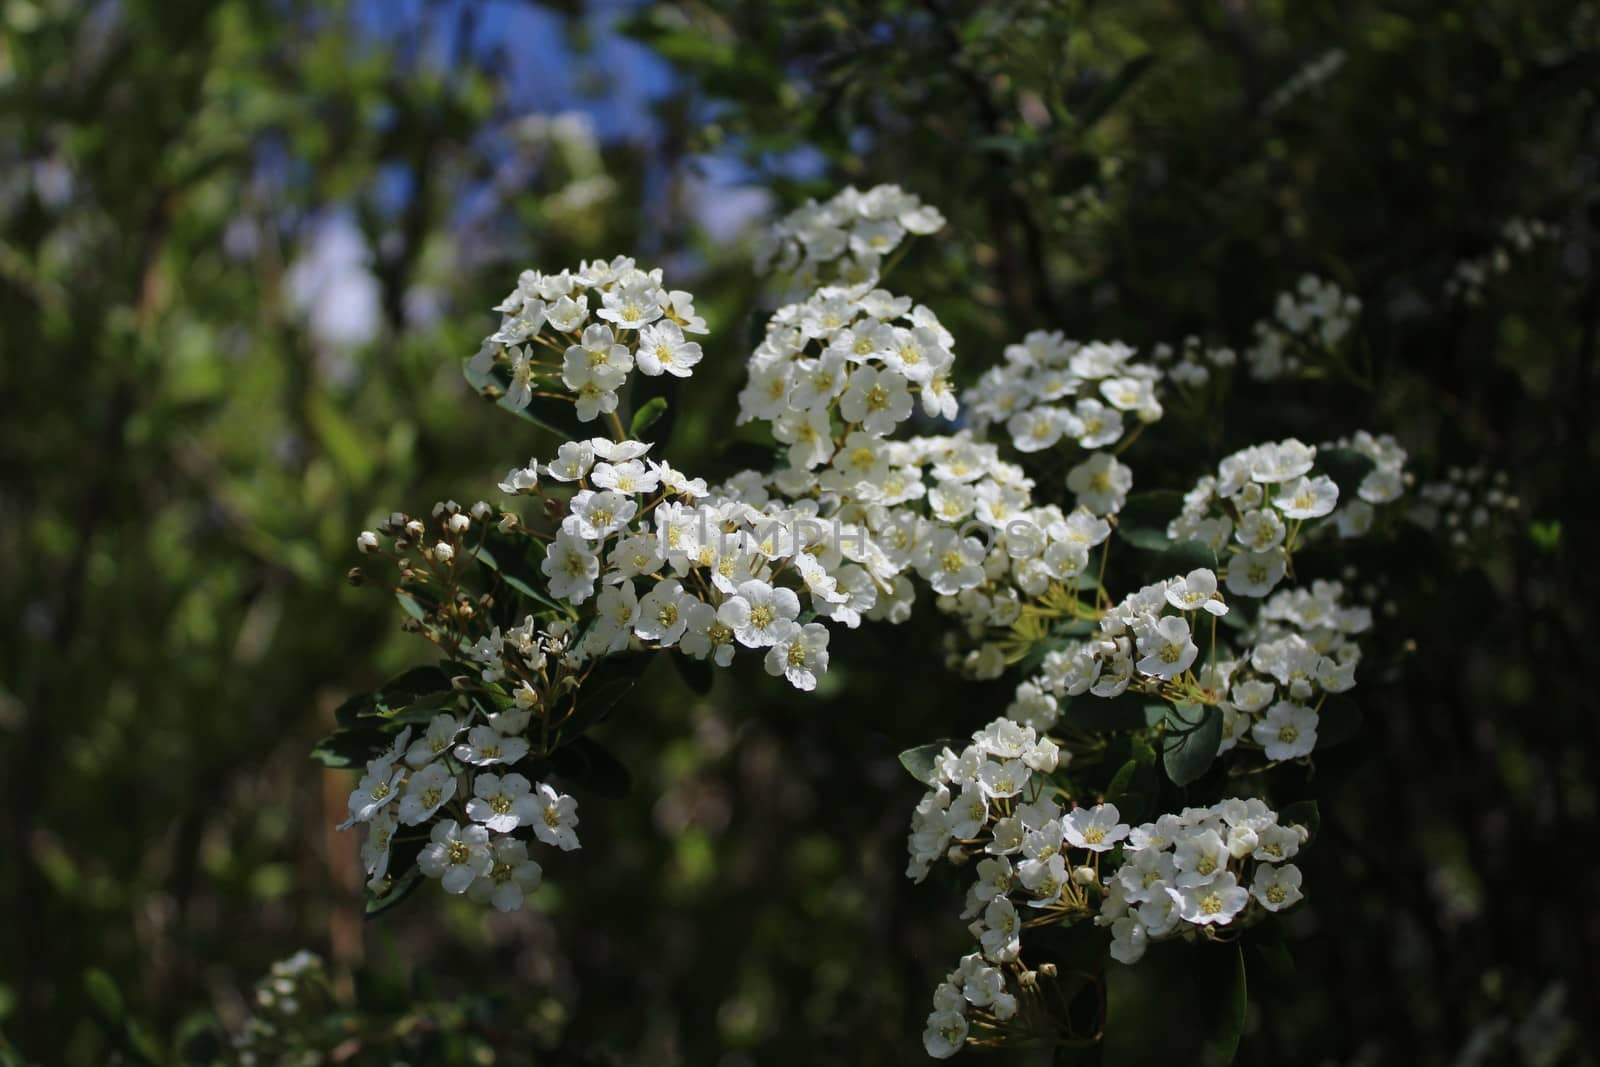 The picture shows white blossoms in the spring